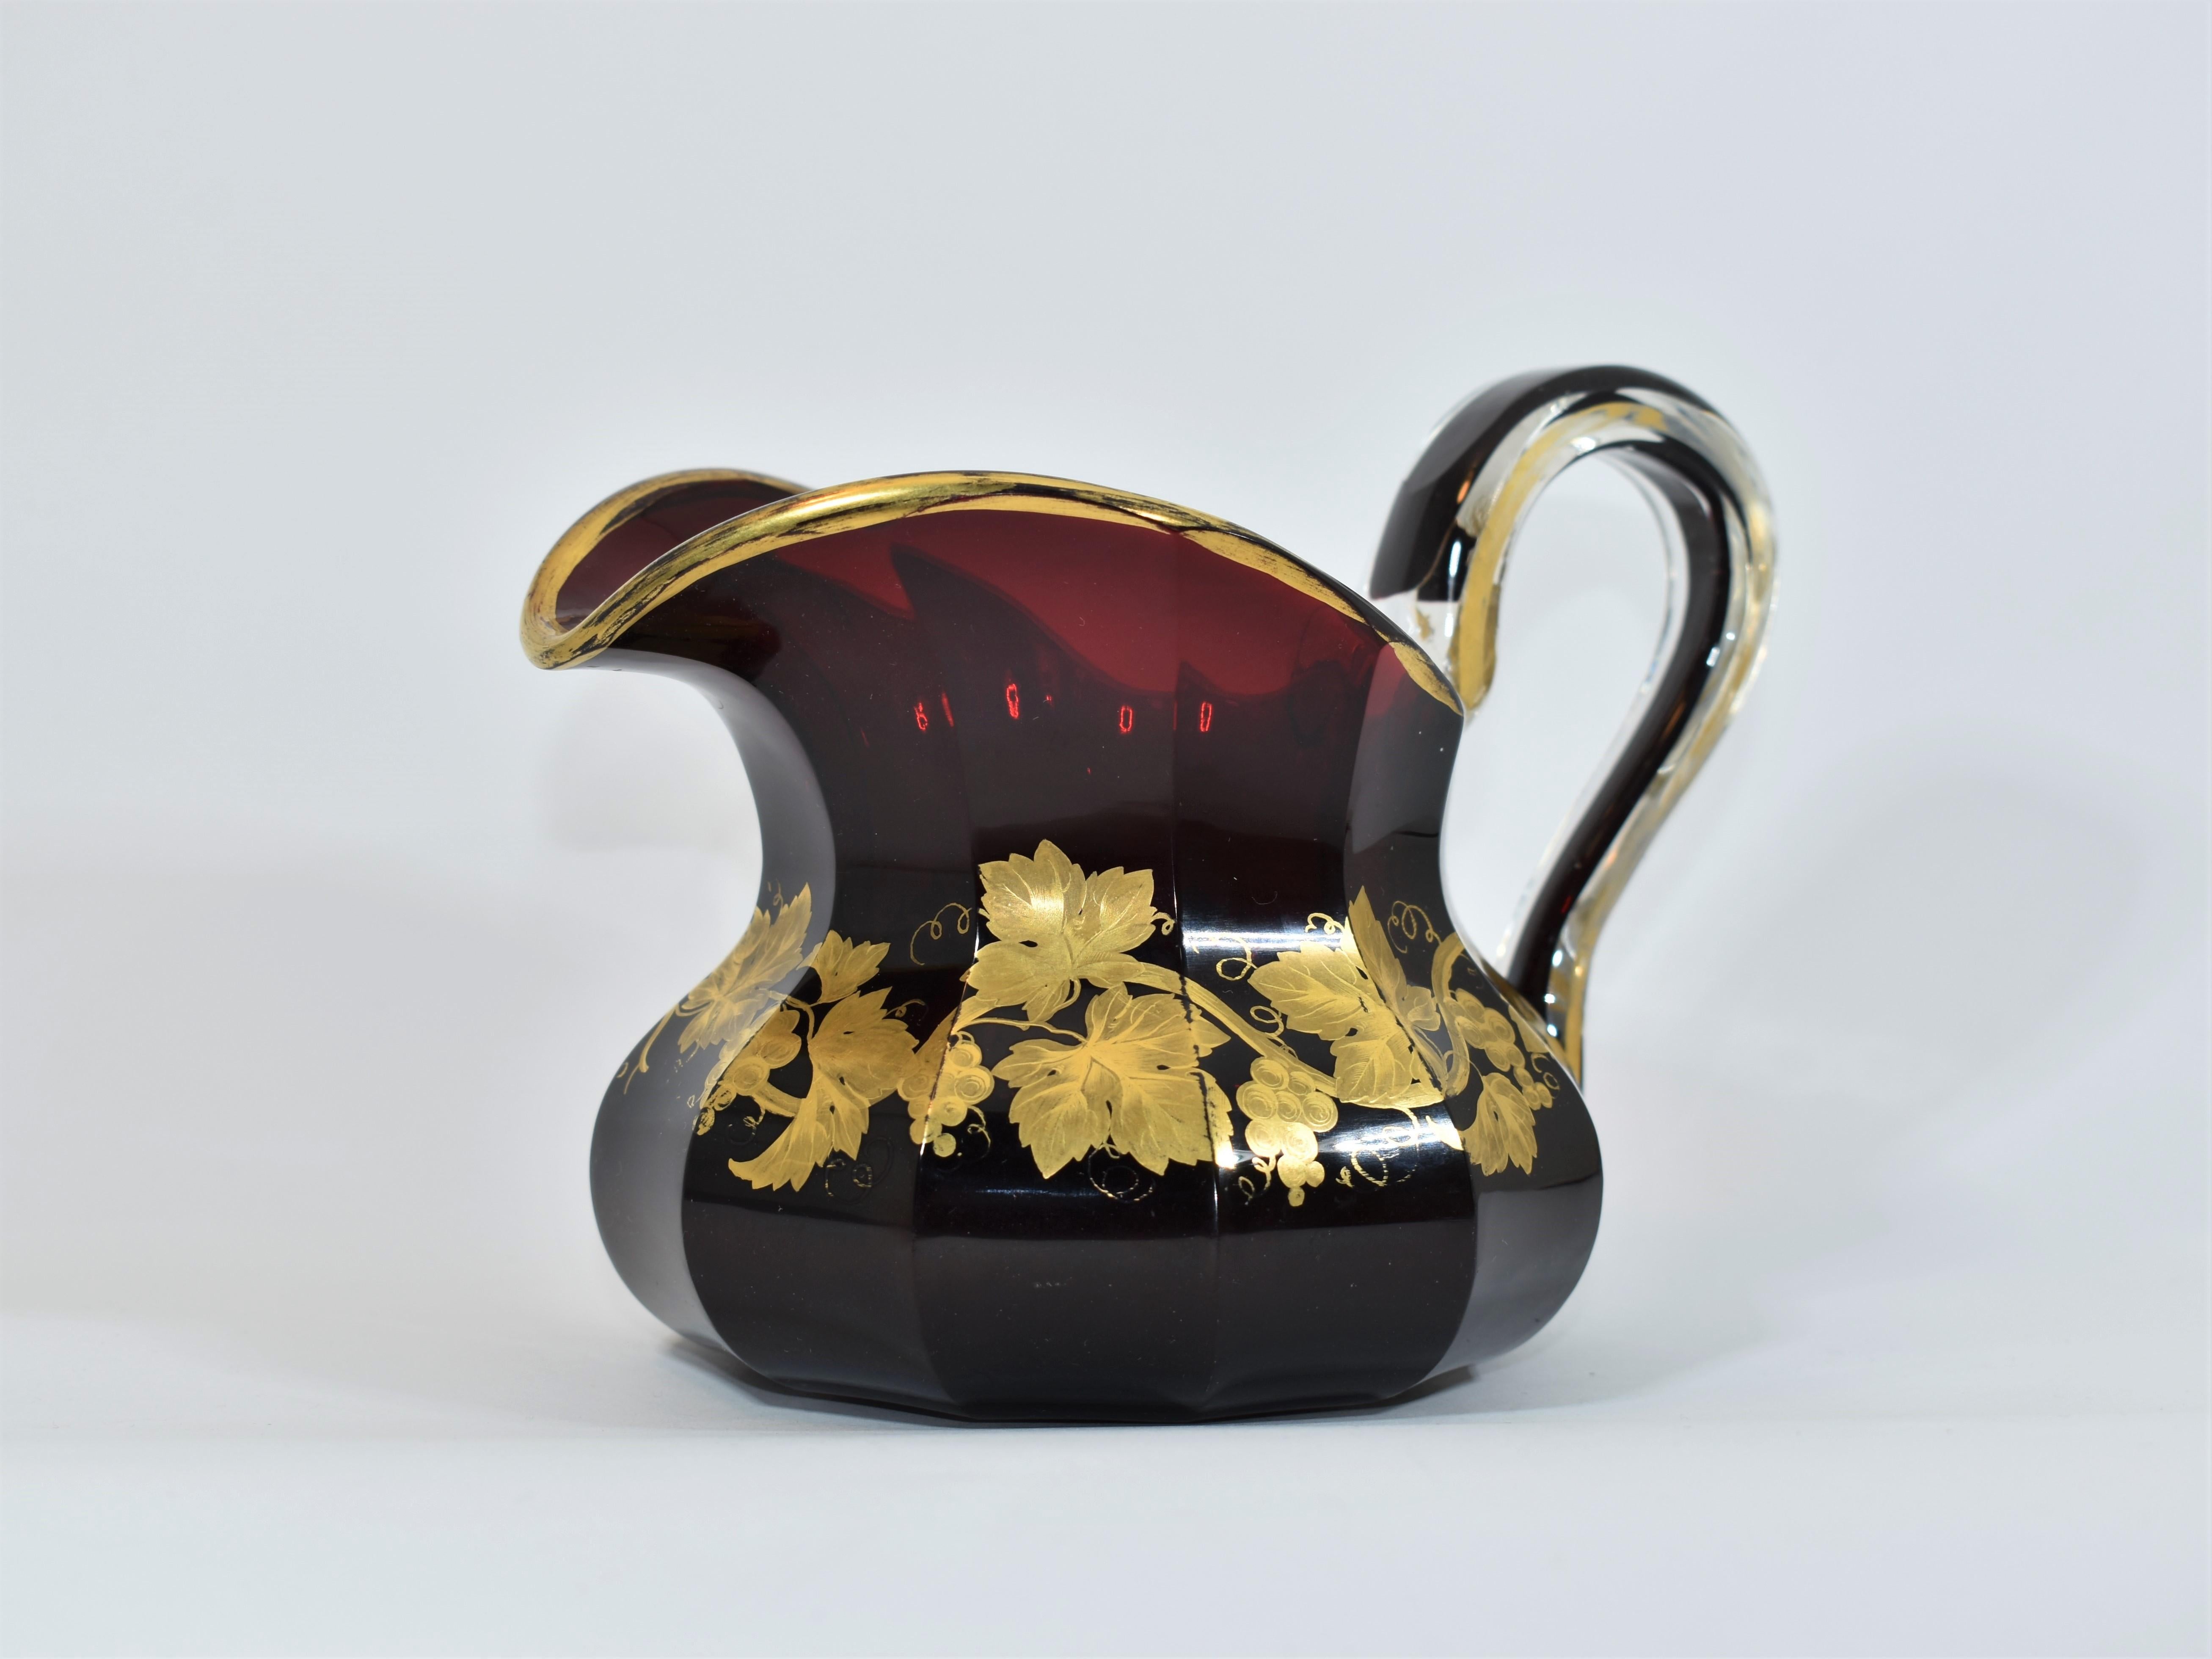 Antique glass jug in ruby red crystal glass
impressive quality, color and substance
Hand-painted with gold enamel featuring vines and gilding highlights.